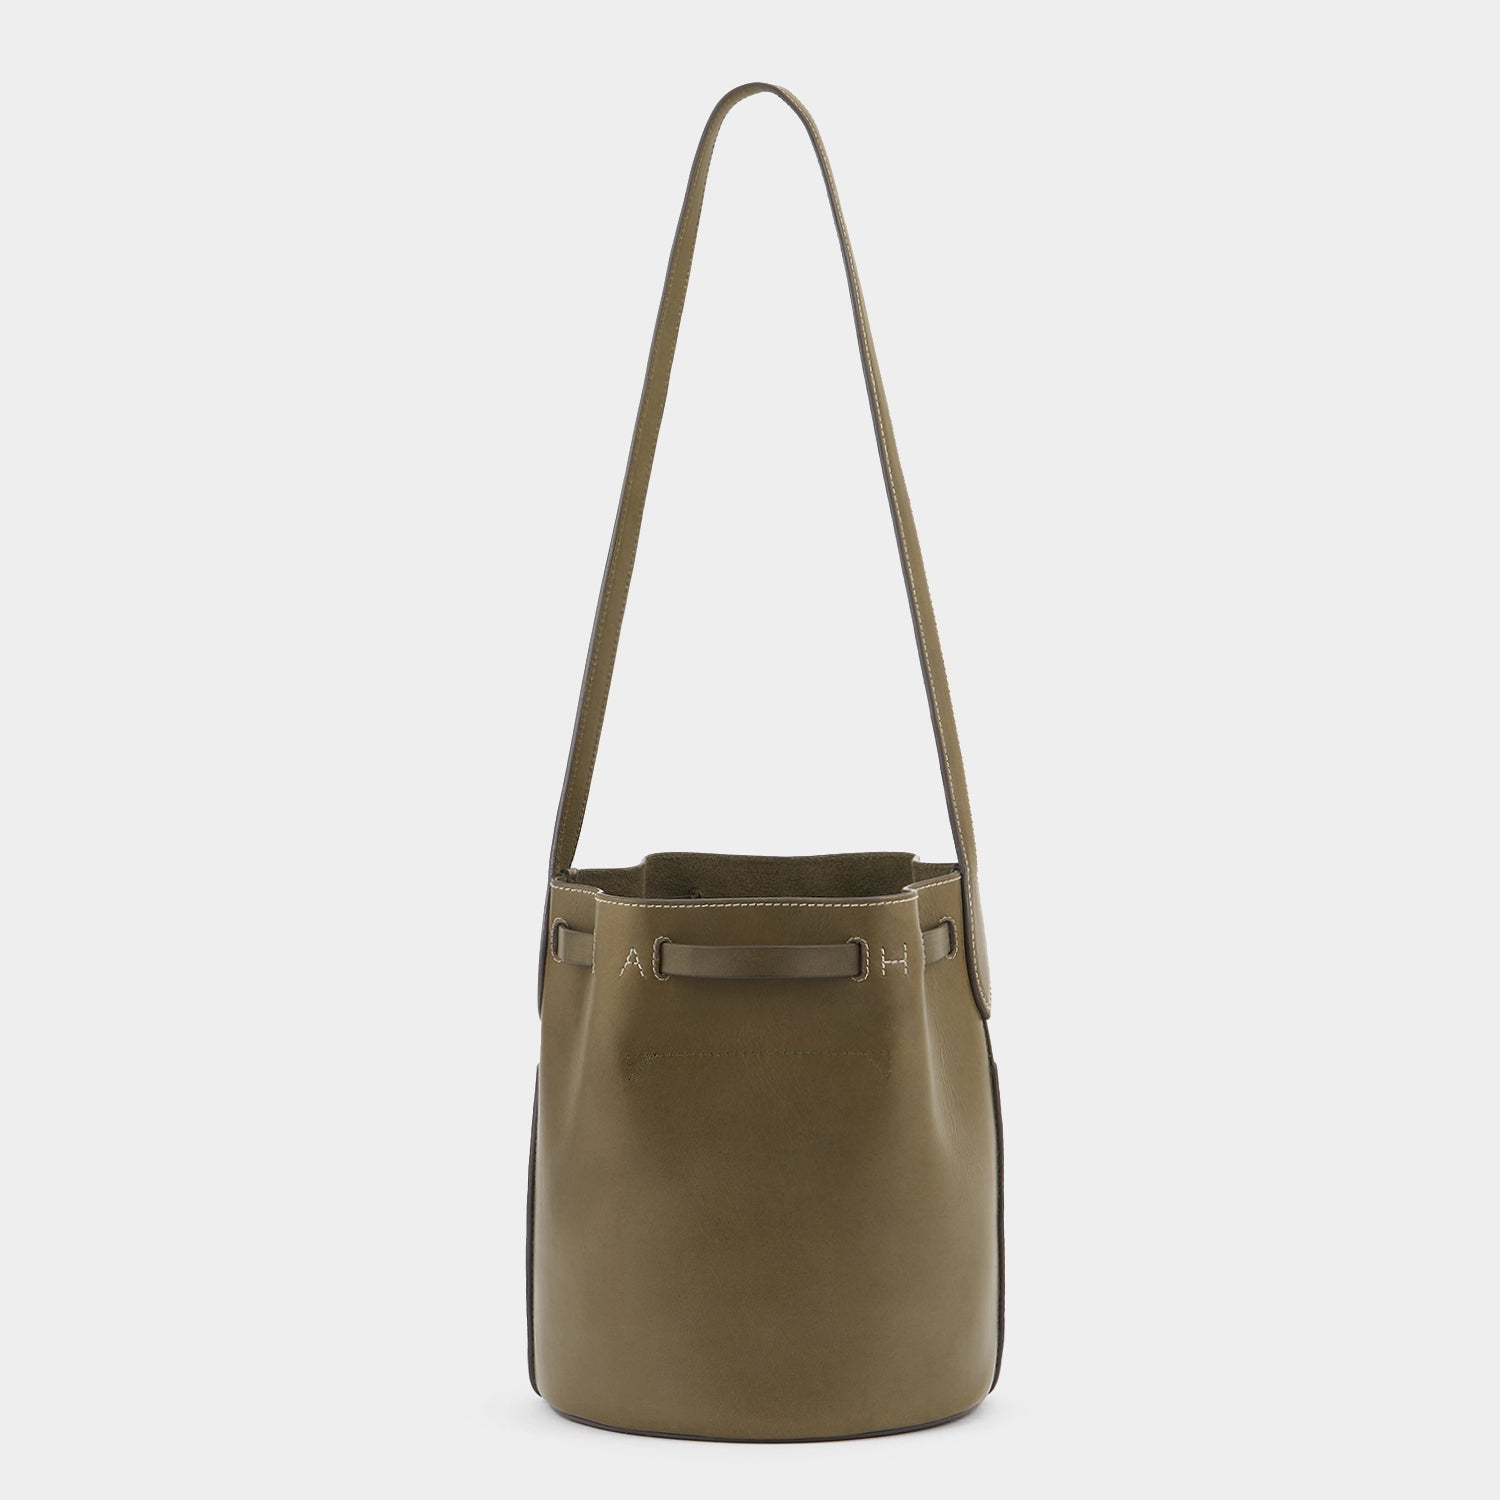 Return to Nature Small Bucket Bag -

                  
                    Compostable Leather in Fern -
                  

                  Anya Hindmarch EU
